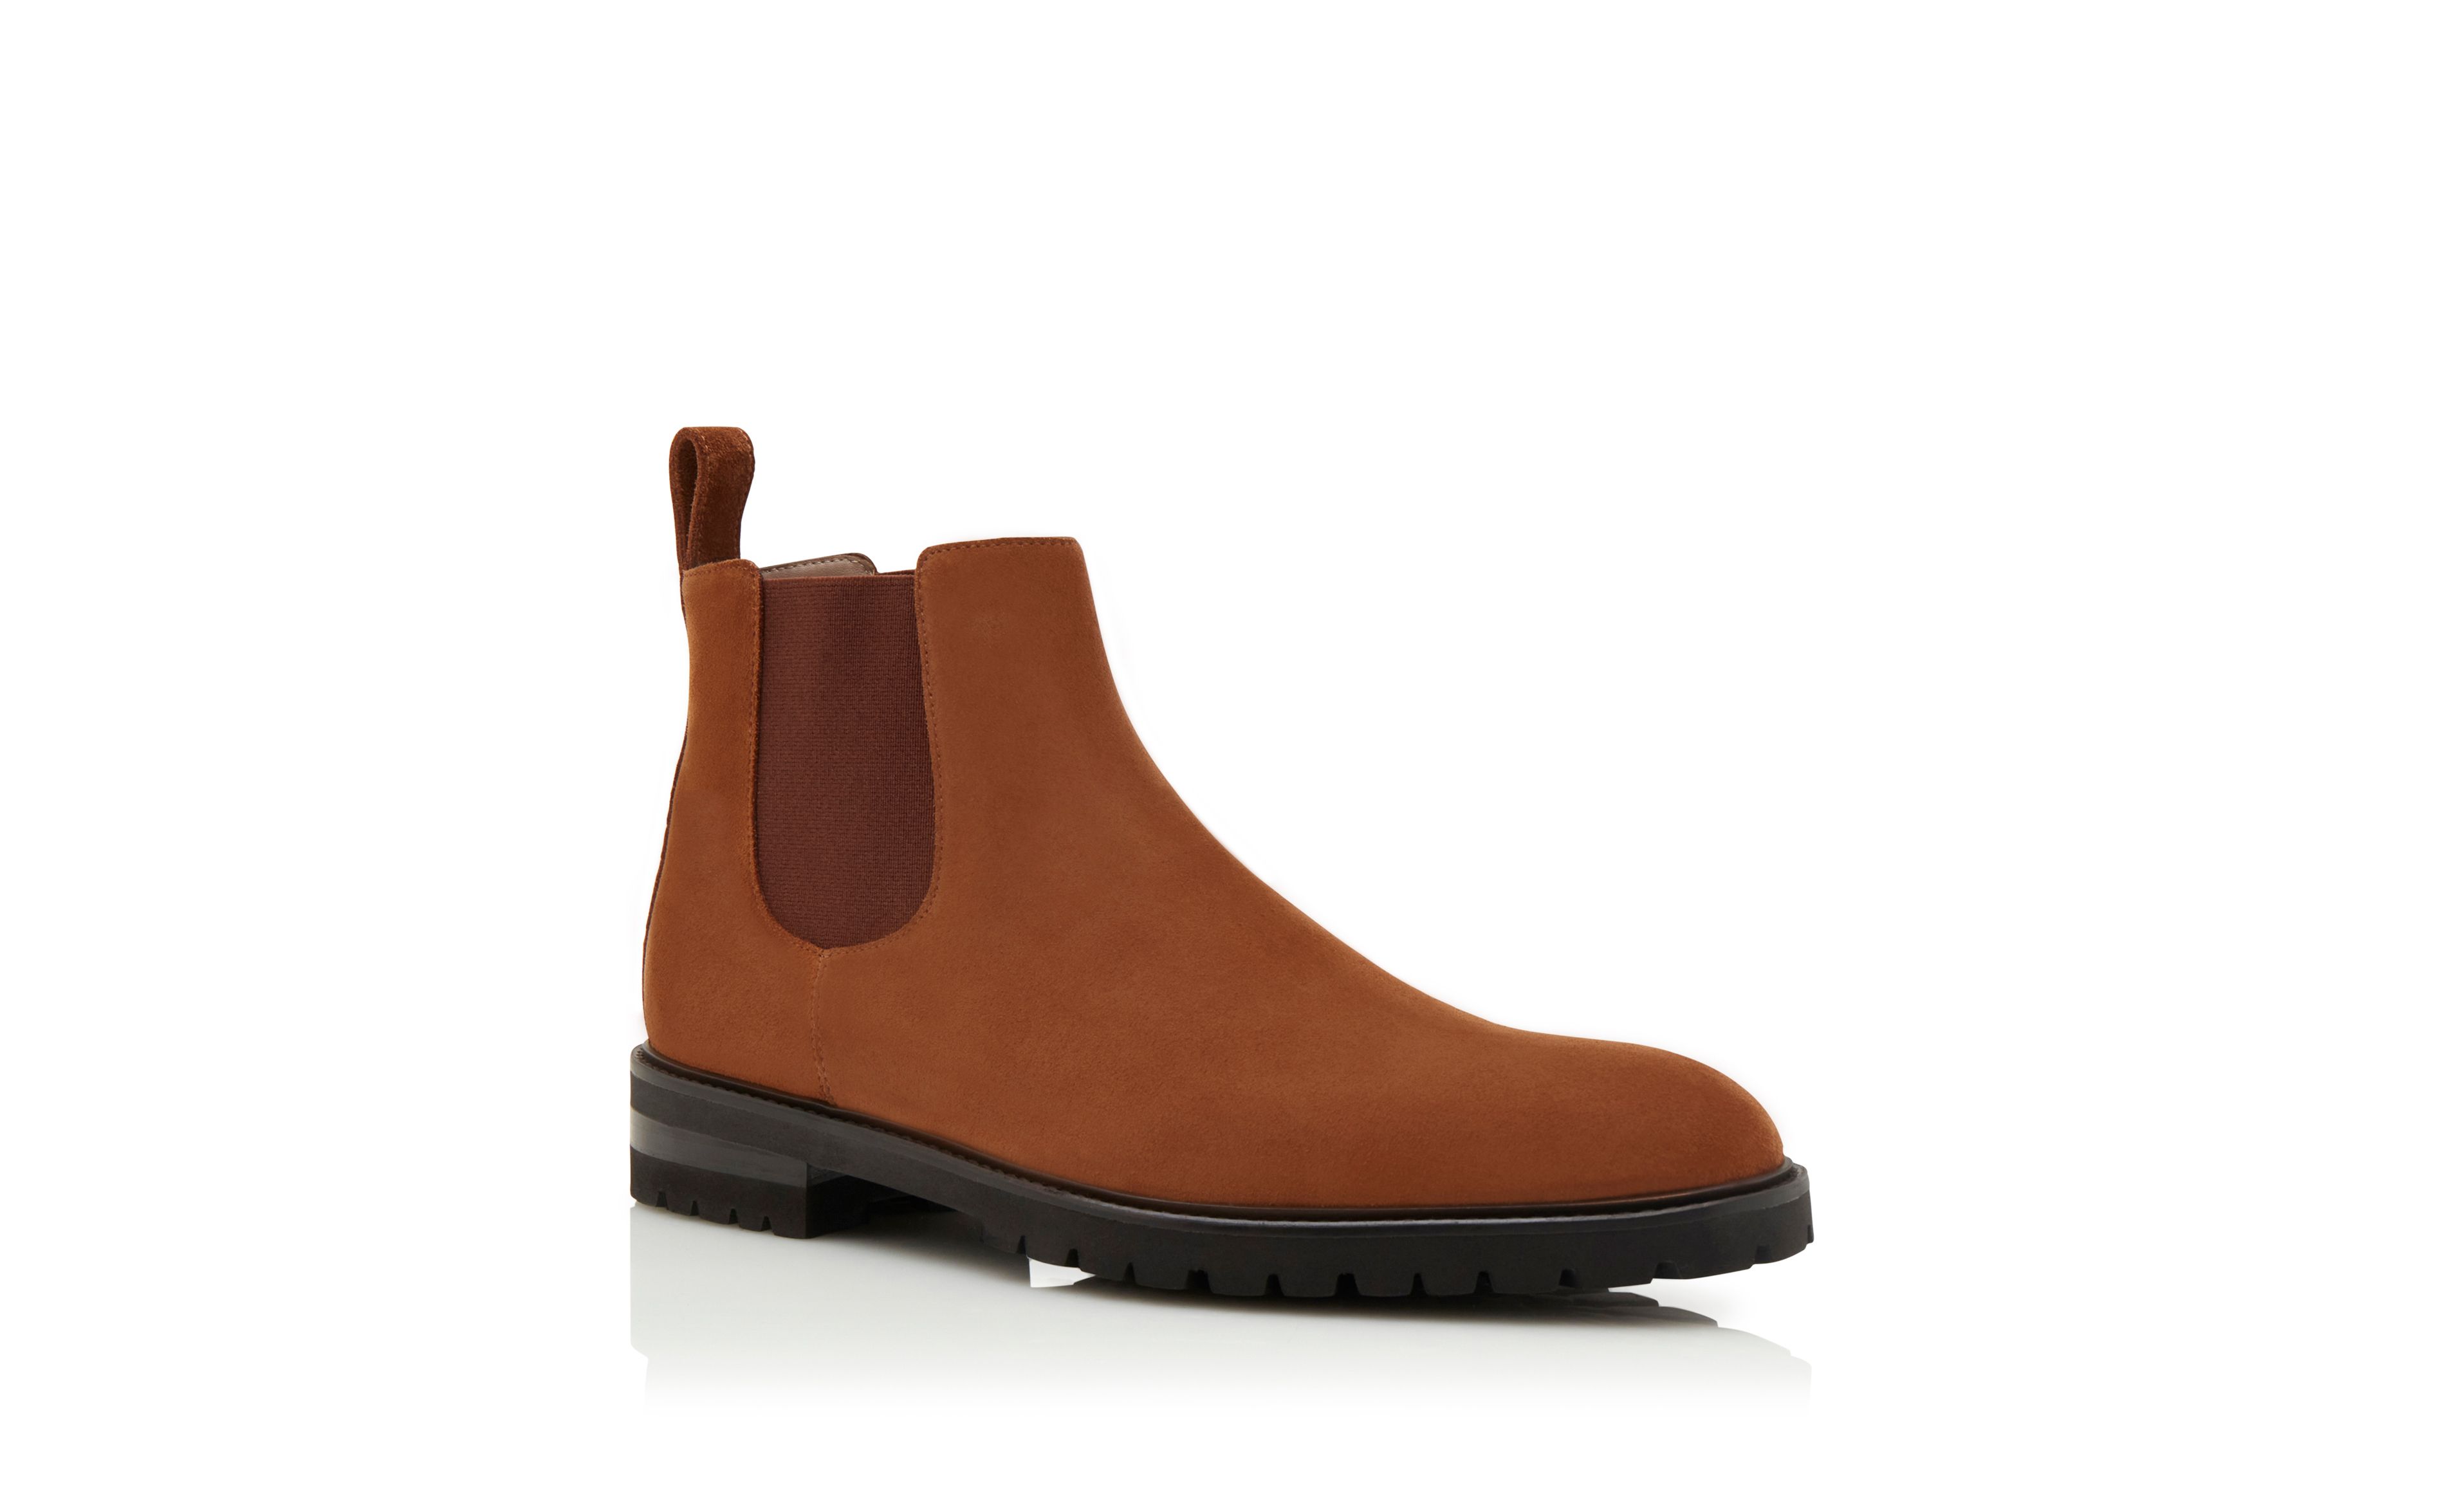 Designer Brown Calf Suede Chelsea Boots - Image Upsell